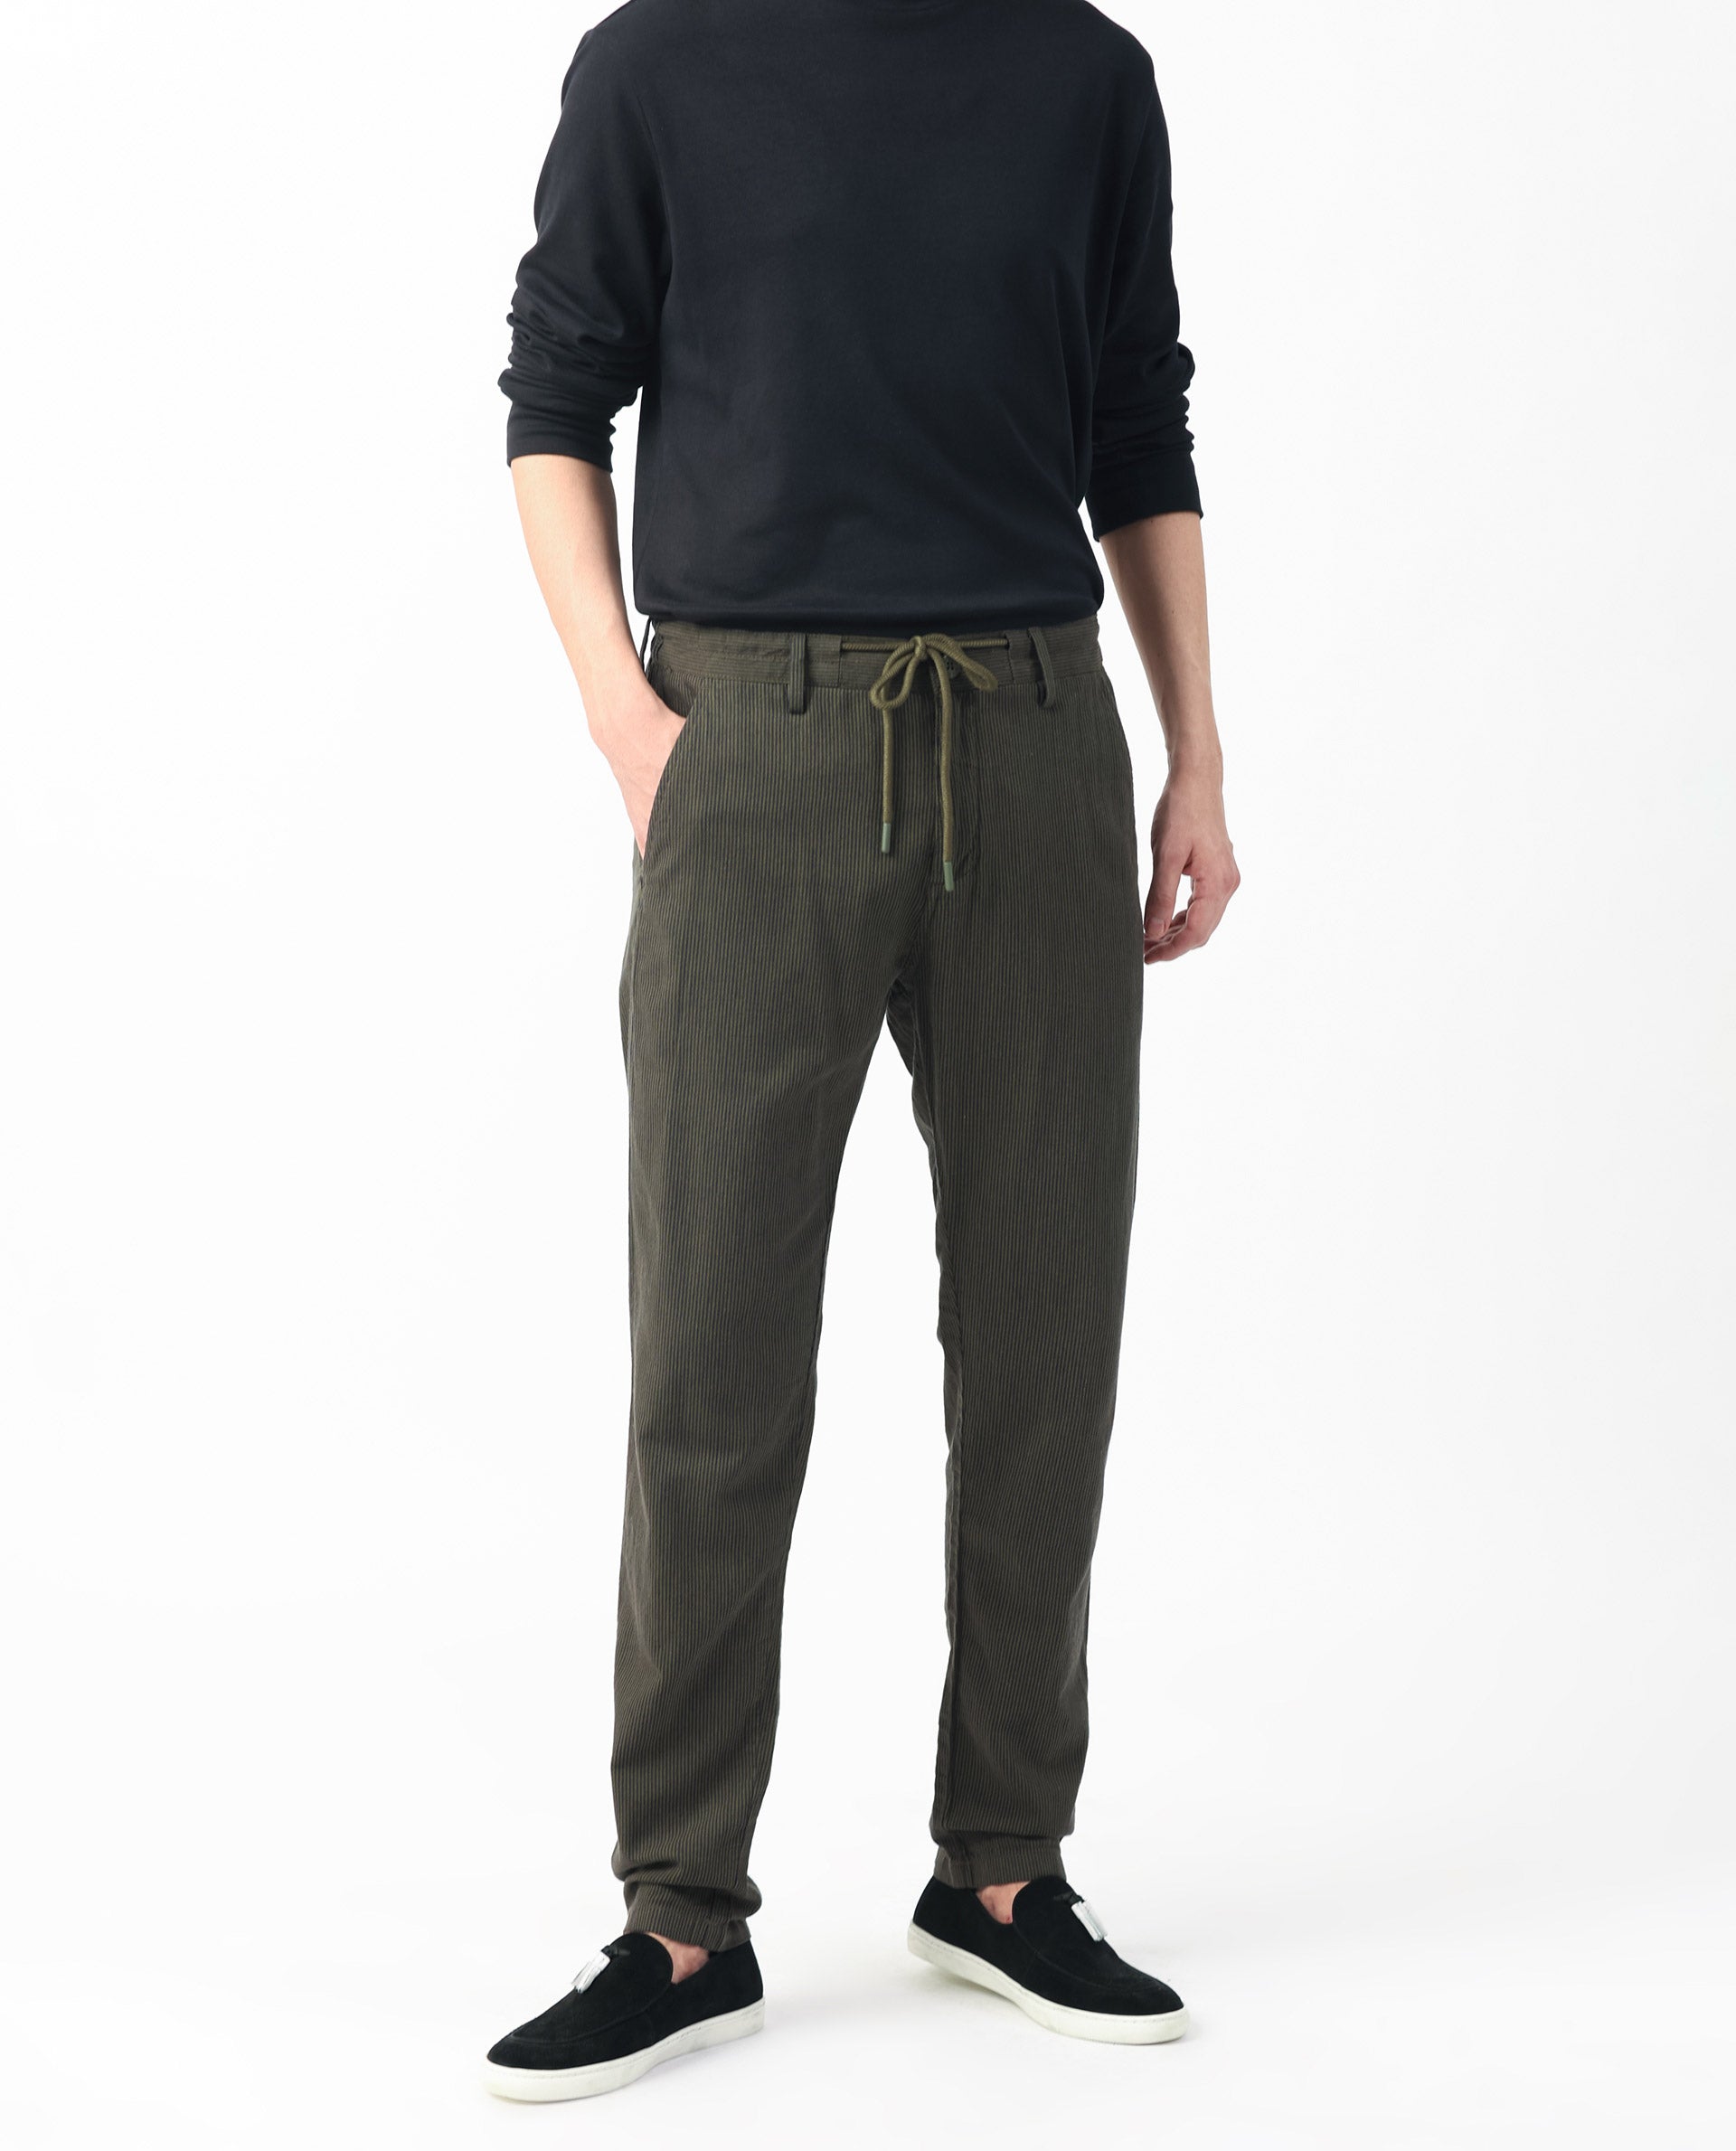 Buy Charcoal Black Cotton Flax Trousers Online at Jaypore.com